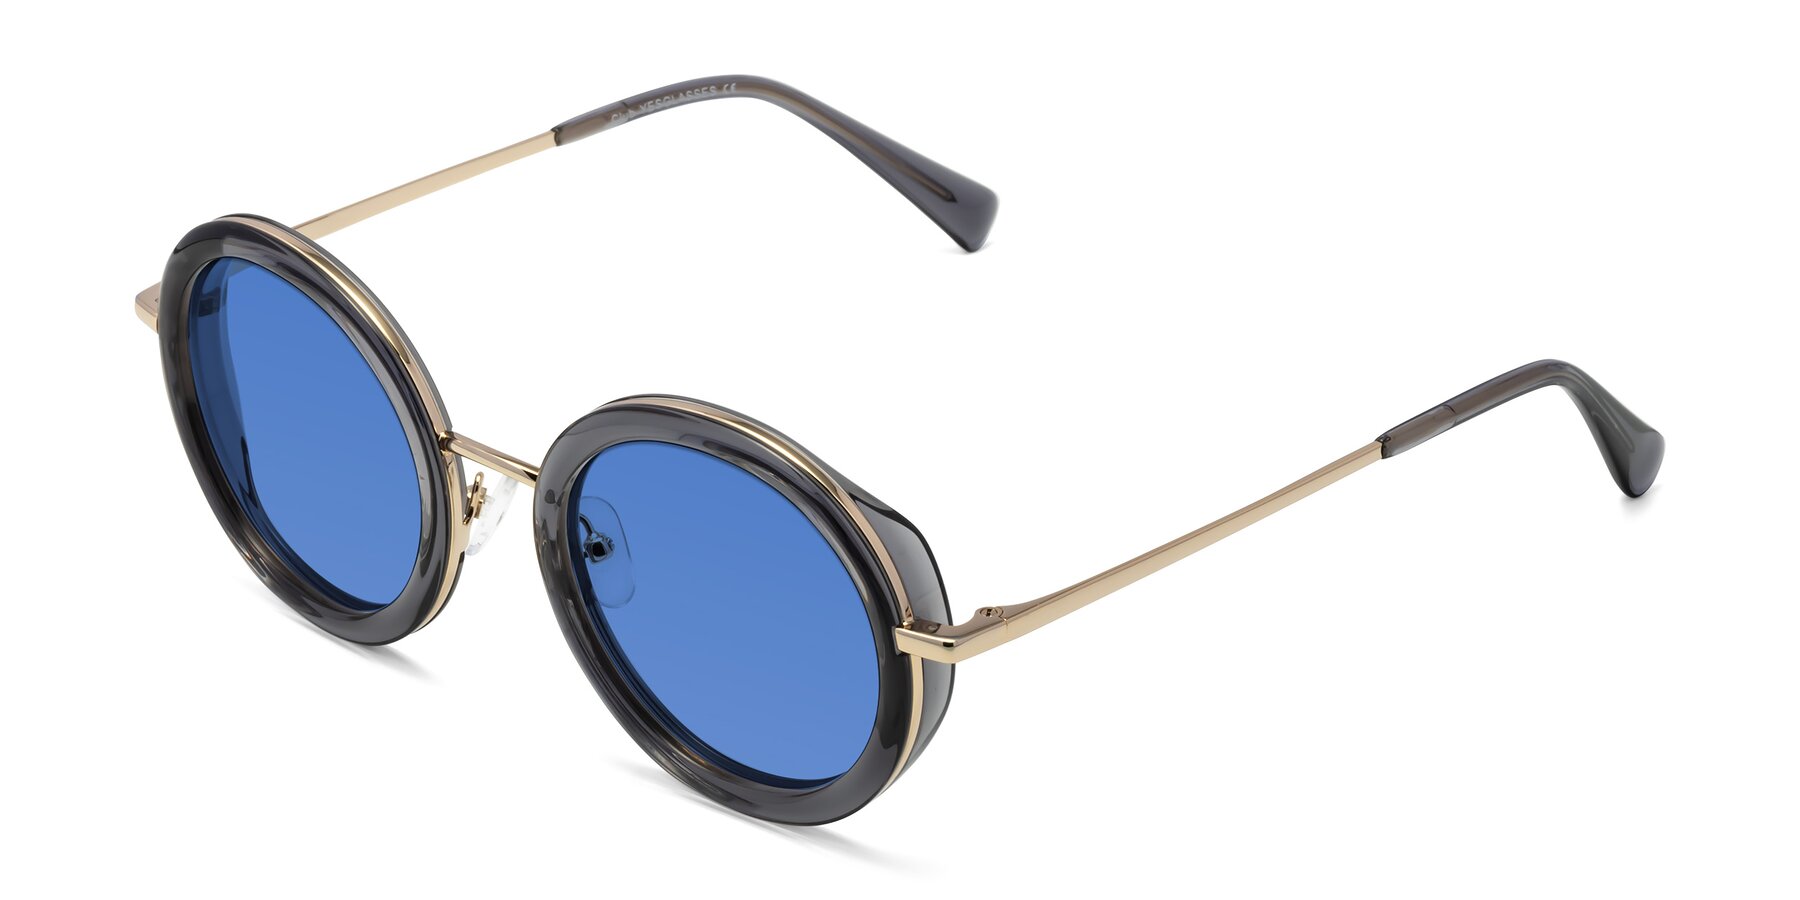 Angle of Club in Gray-Gold with Blue Tinted Lenses